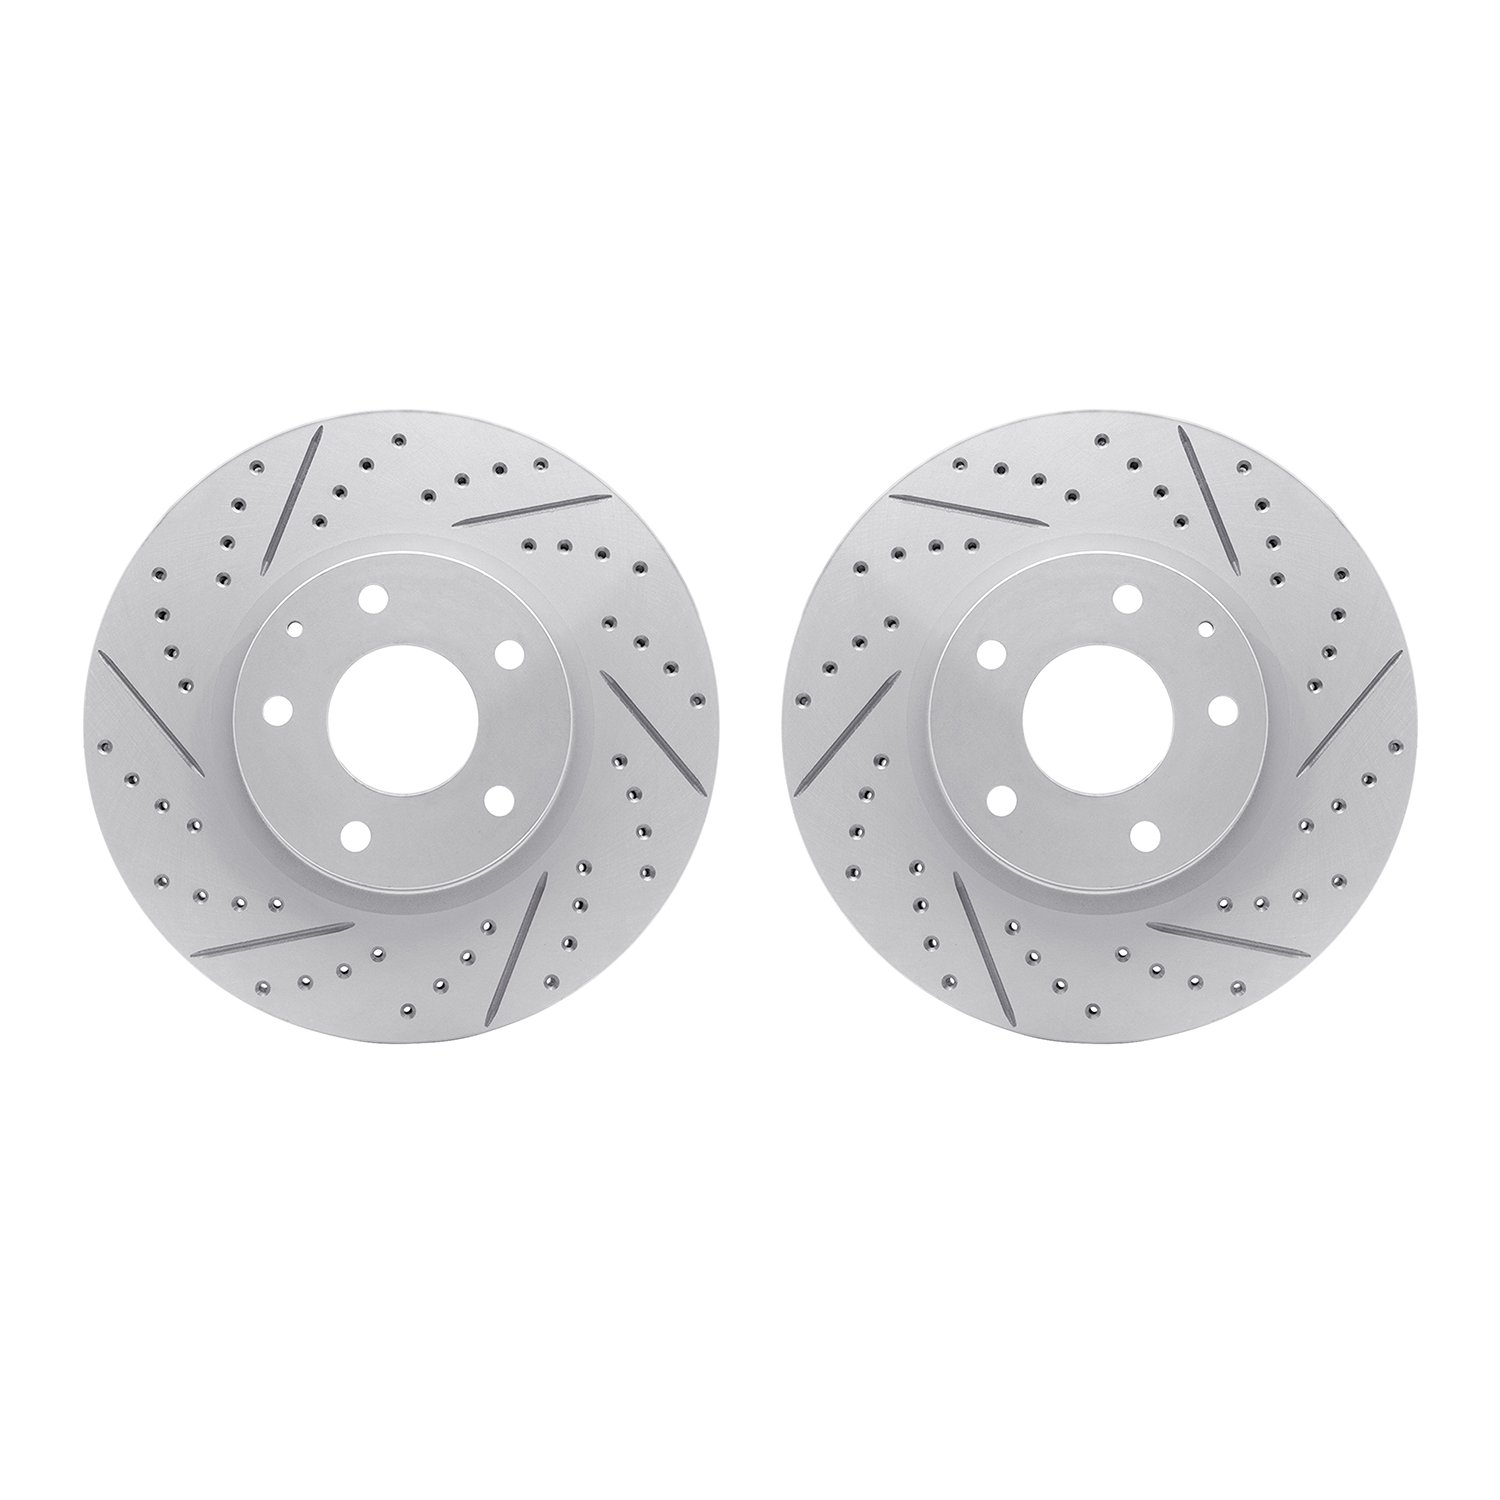 2002-80014 Geoperformance Drilled/Slotted Brake Rotors, 2016-2019 Ford/Lincoln/Mercury/Mazda, Position: Front